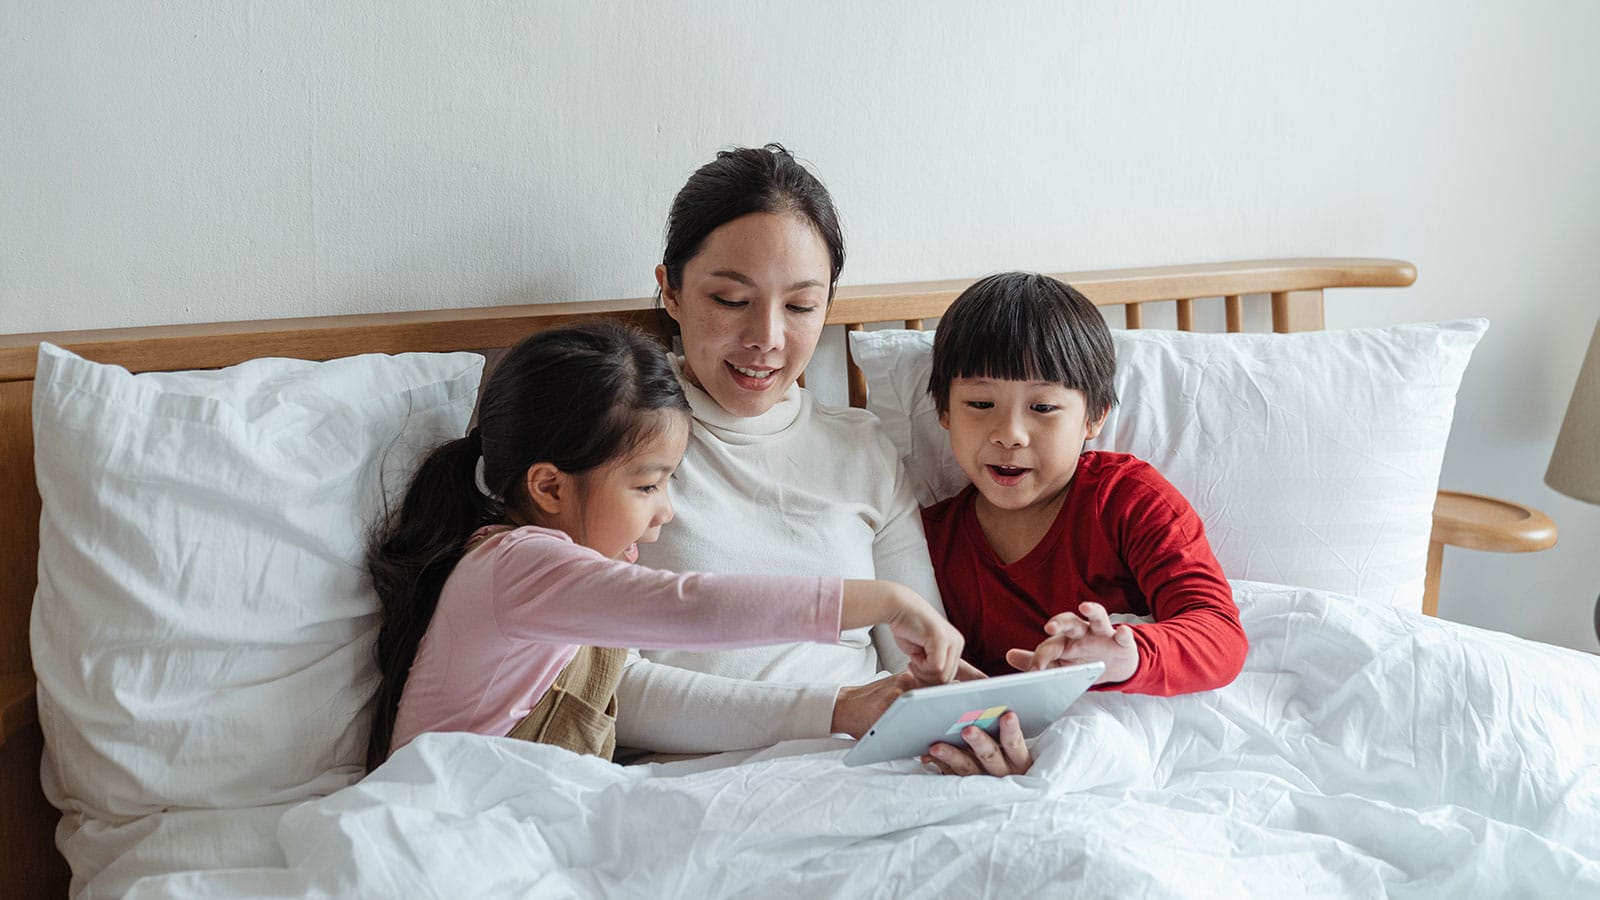 Woman and Kids Sitting on Bed While Using Tablet Computer